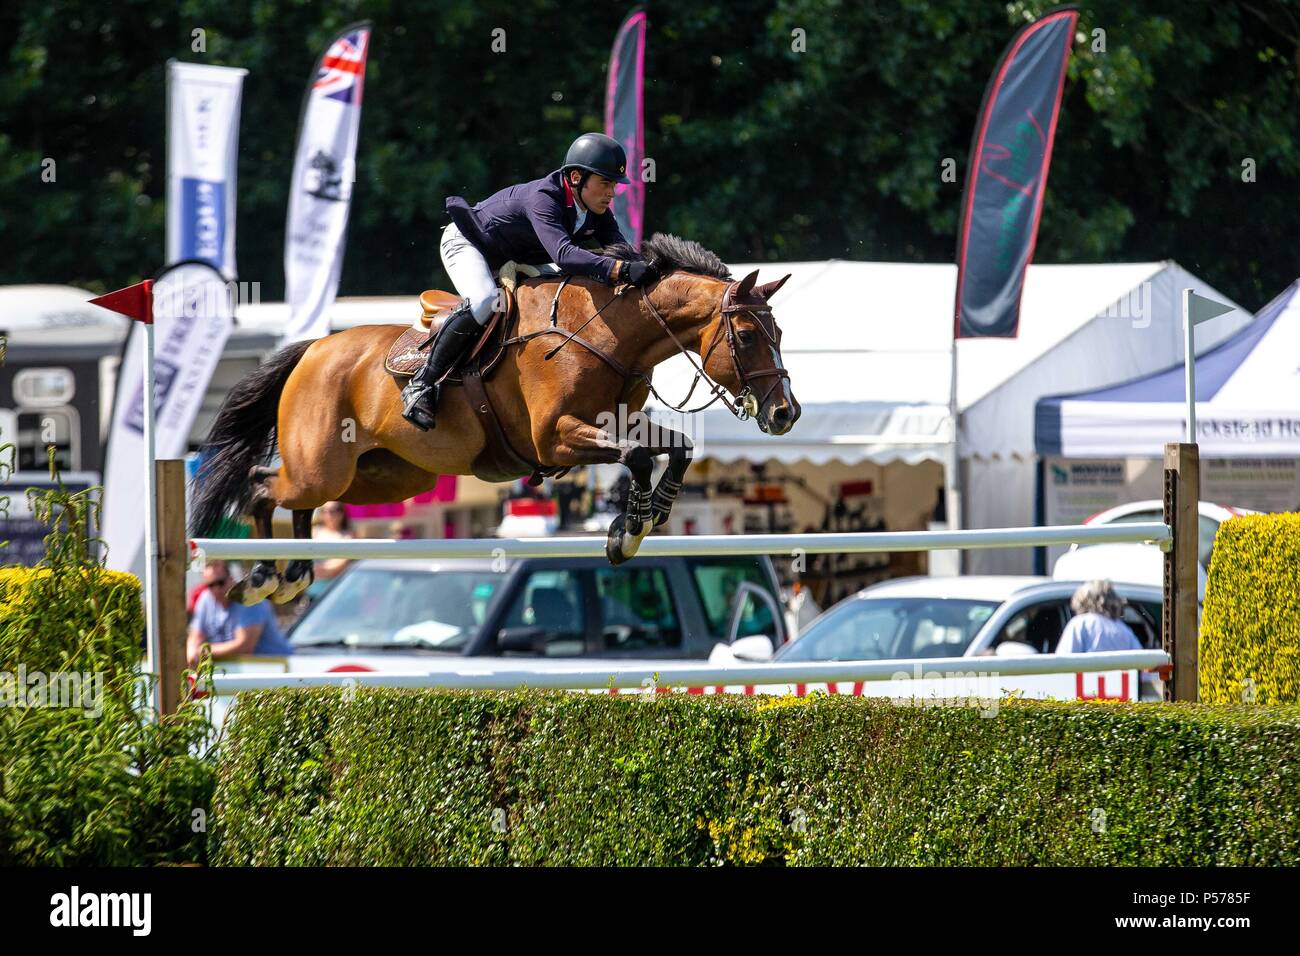 West Sussex, UK. 24th Jun, 2018. Joe Whitaker riding  Virginia. GBR.The Al Shira'aa Derby. The Al Shira'aa Hickstead Derby Meeting. Showjumping. The All England Jumping Course. Hickstead. West Sussex. UK. Day 5. 24/06/2018. Credit: Sport In Pictures/Alamy Live News Stock Photo